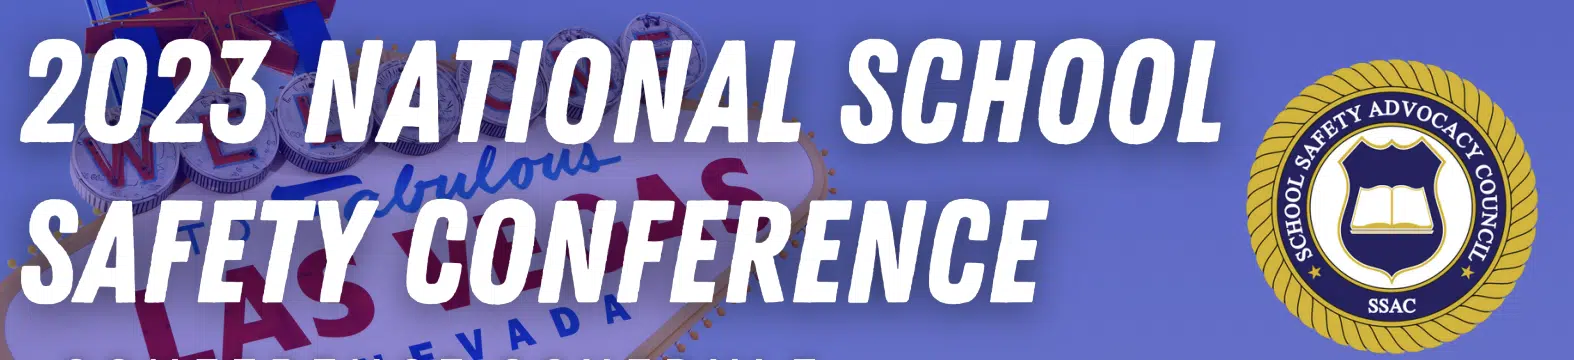 2023 National School Safety Conference Banner